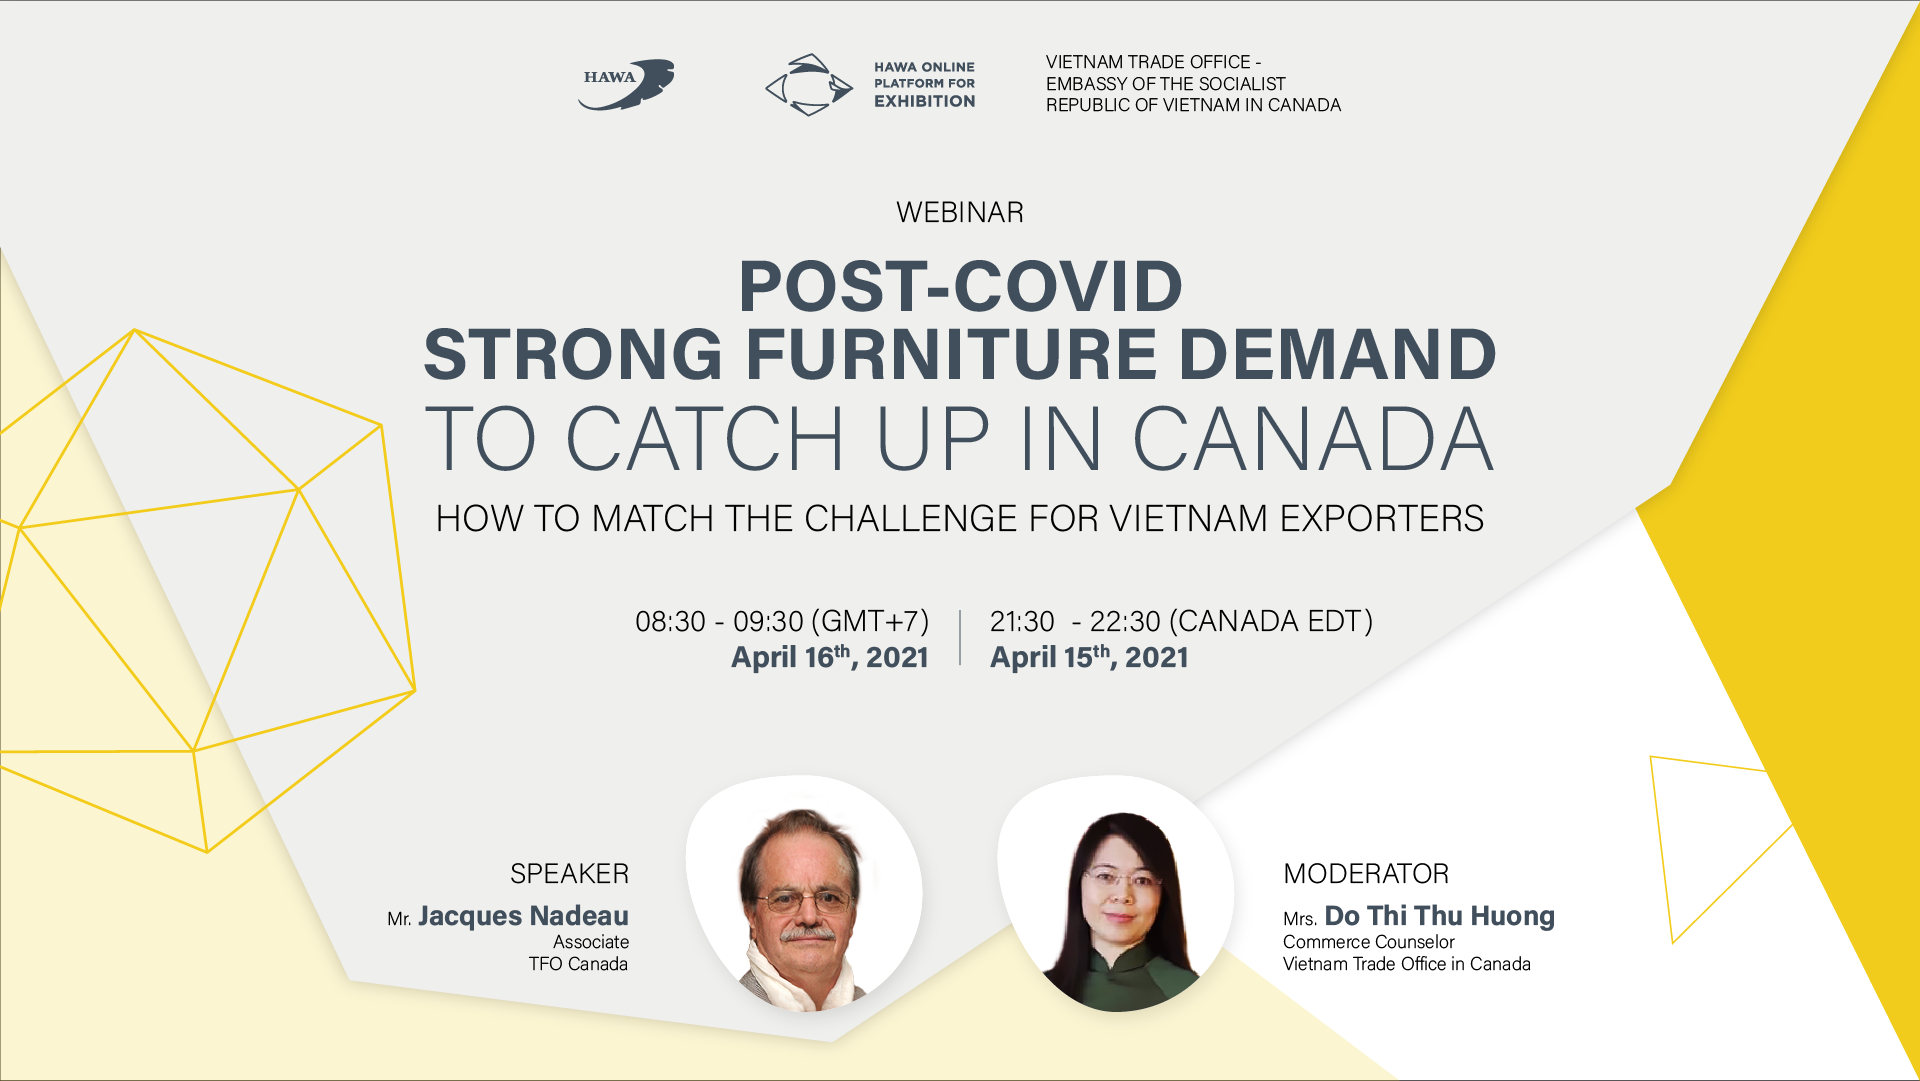 WEBINAR: POST – COVID STRONG FURNITURE DEMAND TO CATCH UP IN CANADA